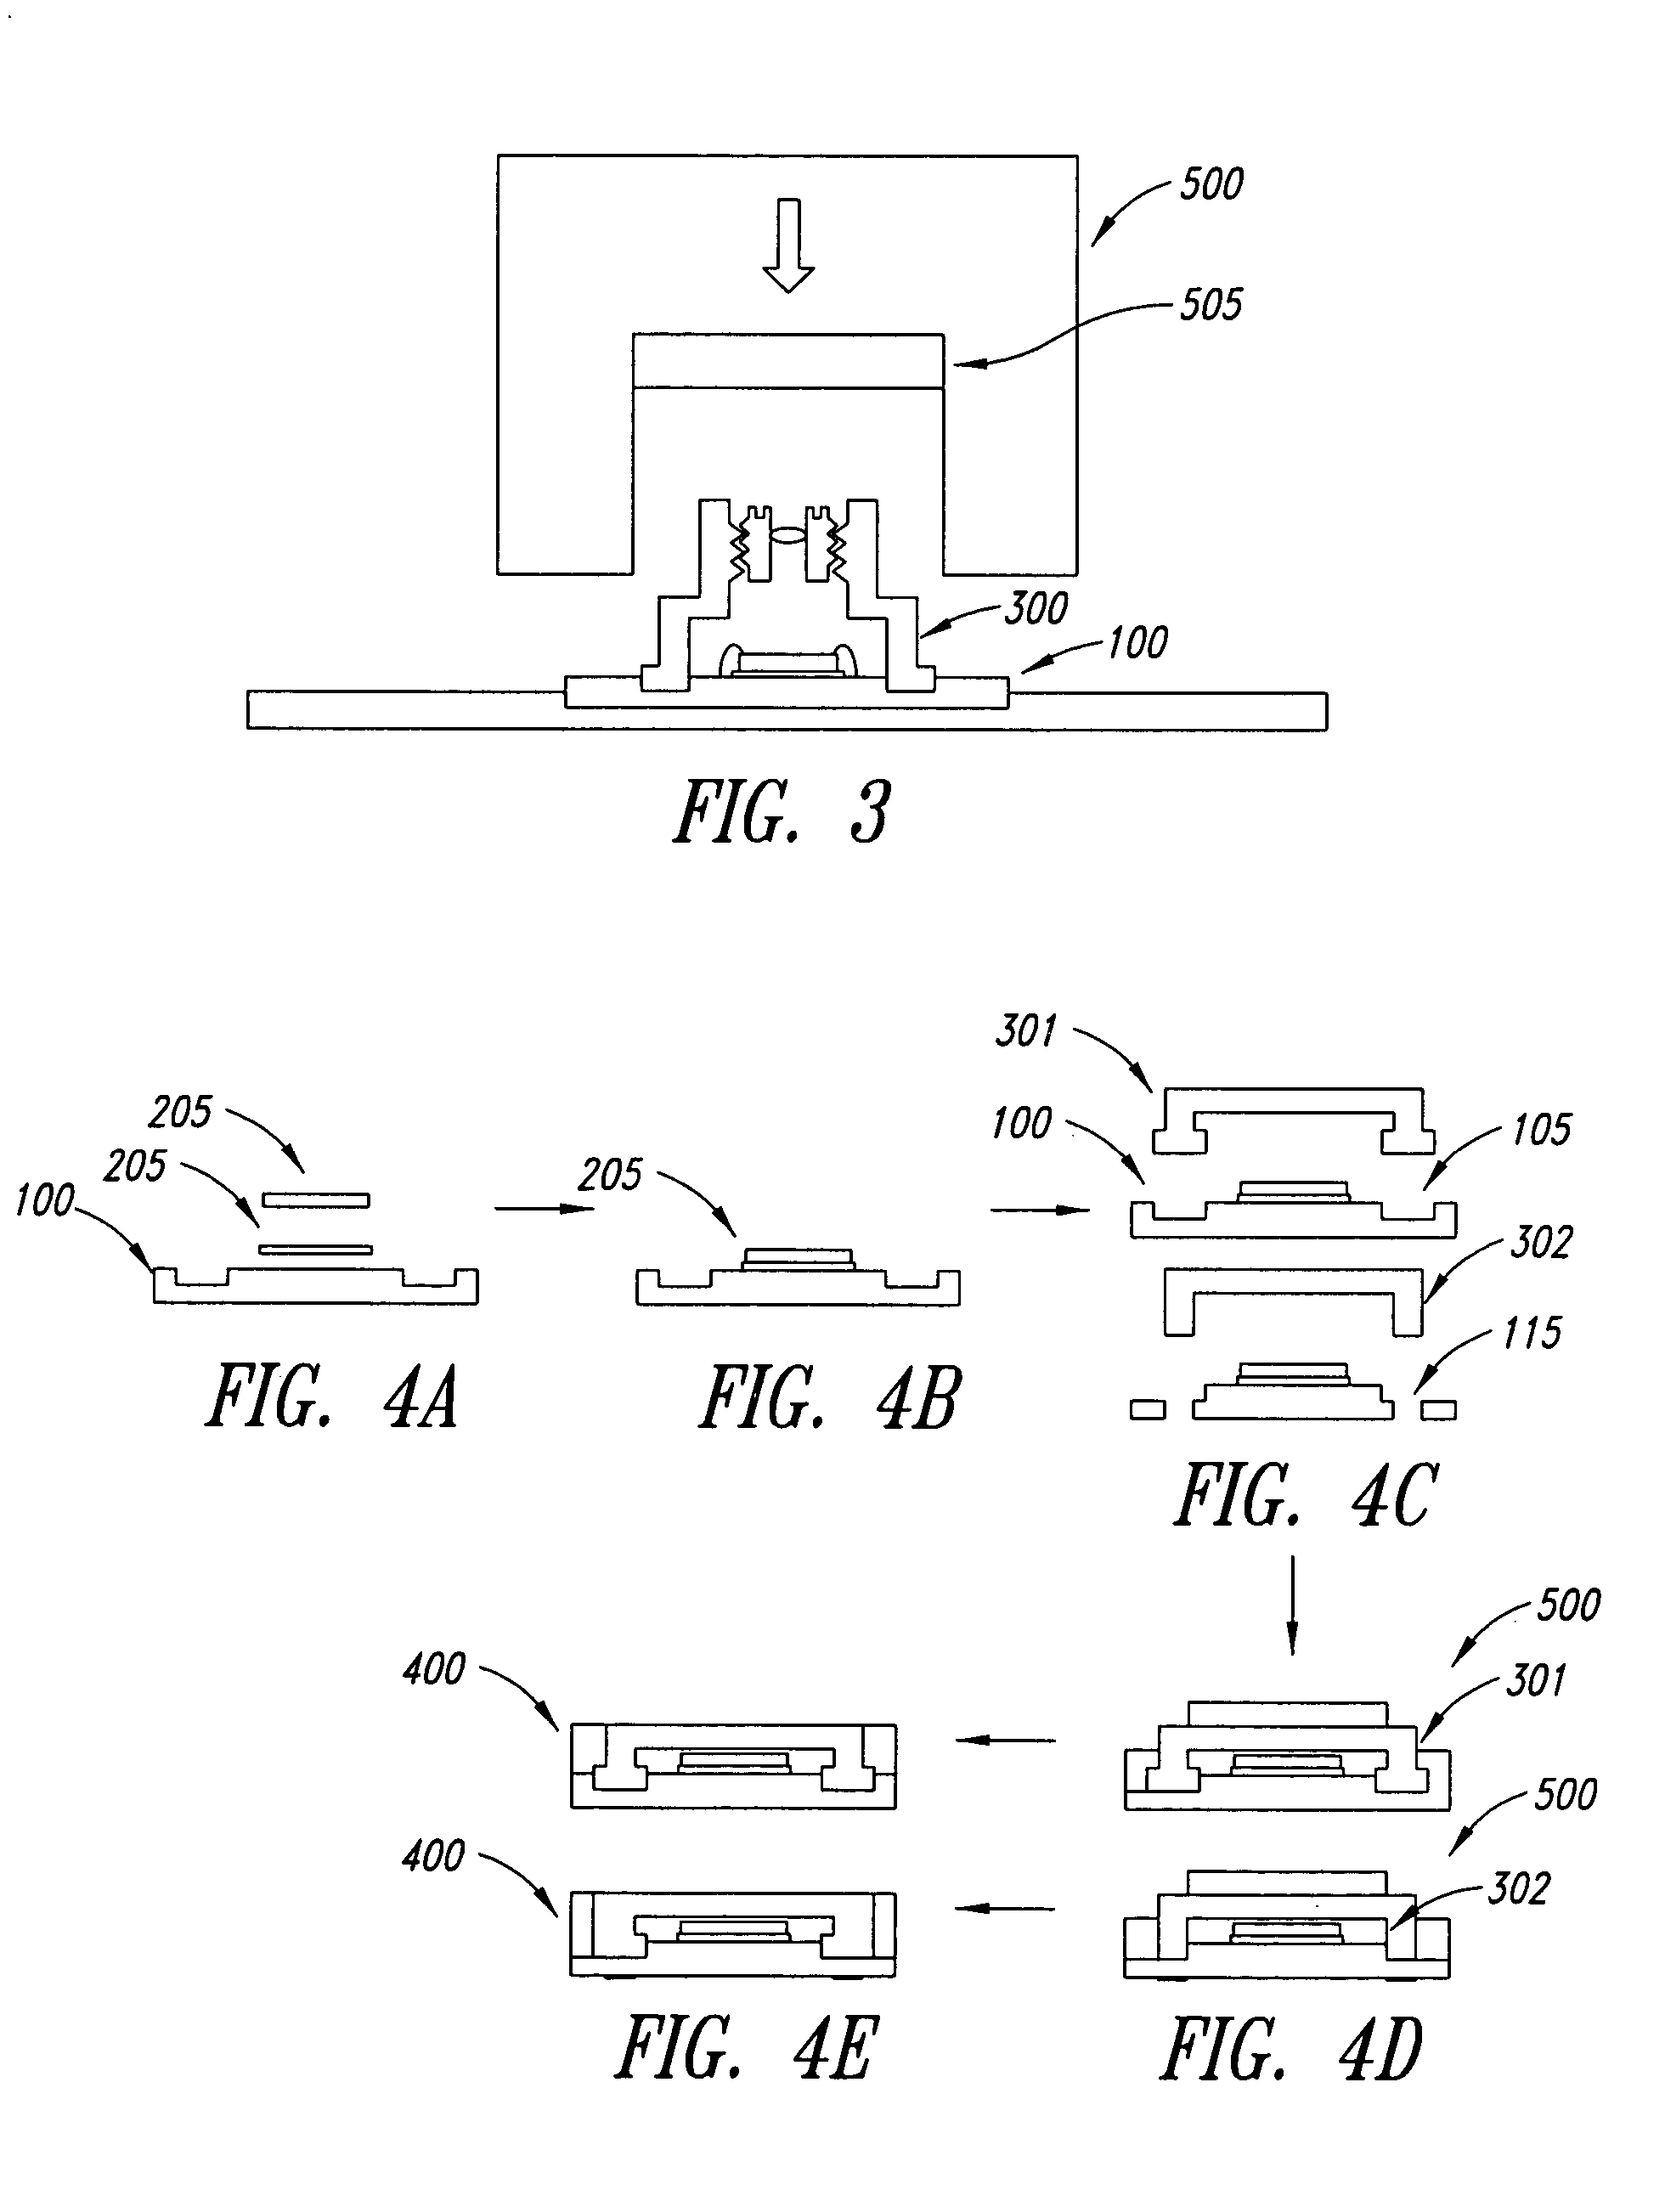 Semiconductor device package and method of manufacture